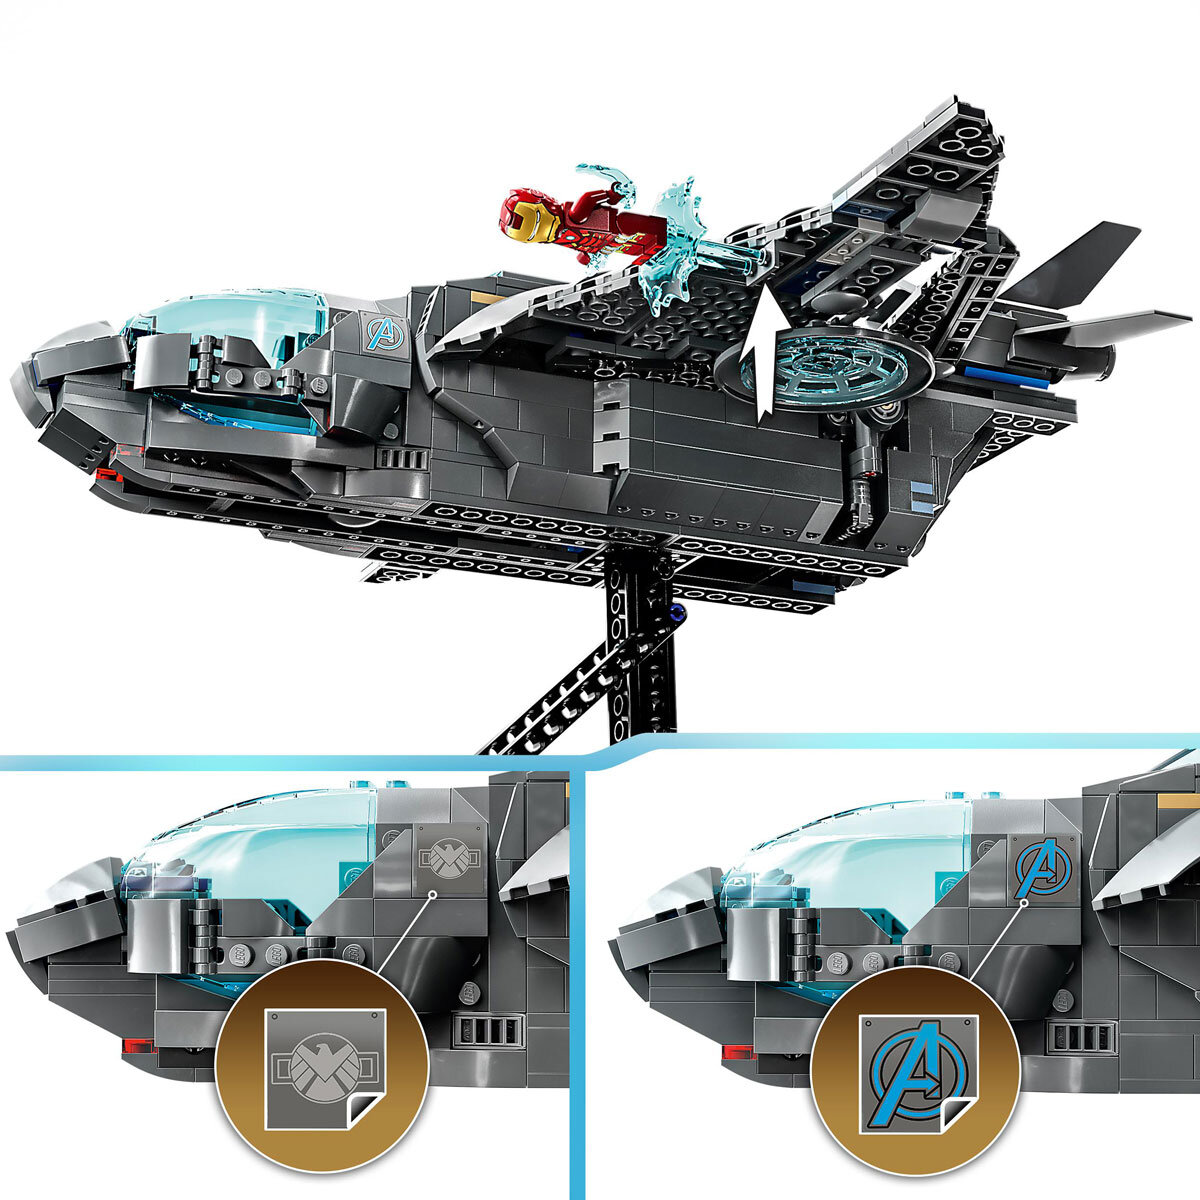 Buy LEGO The Avengers Quinjet Features Image at Costco.co.uk